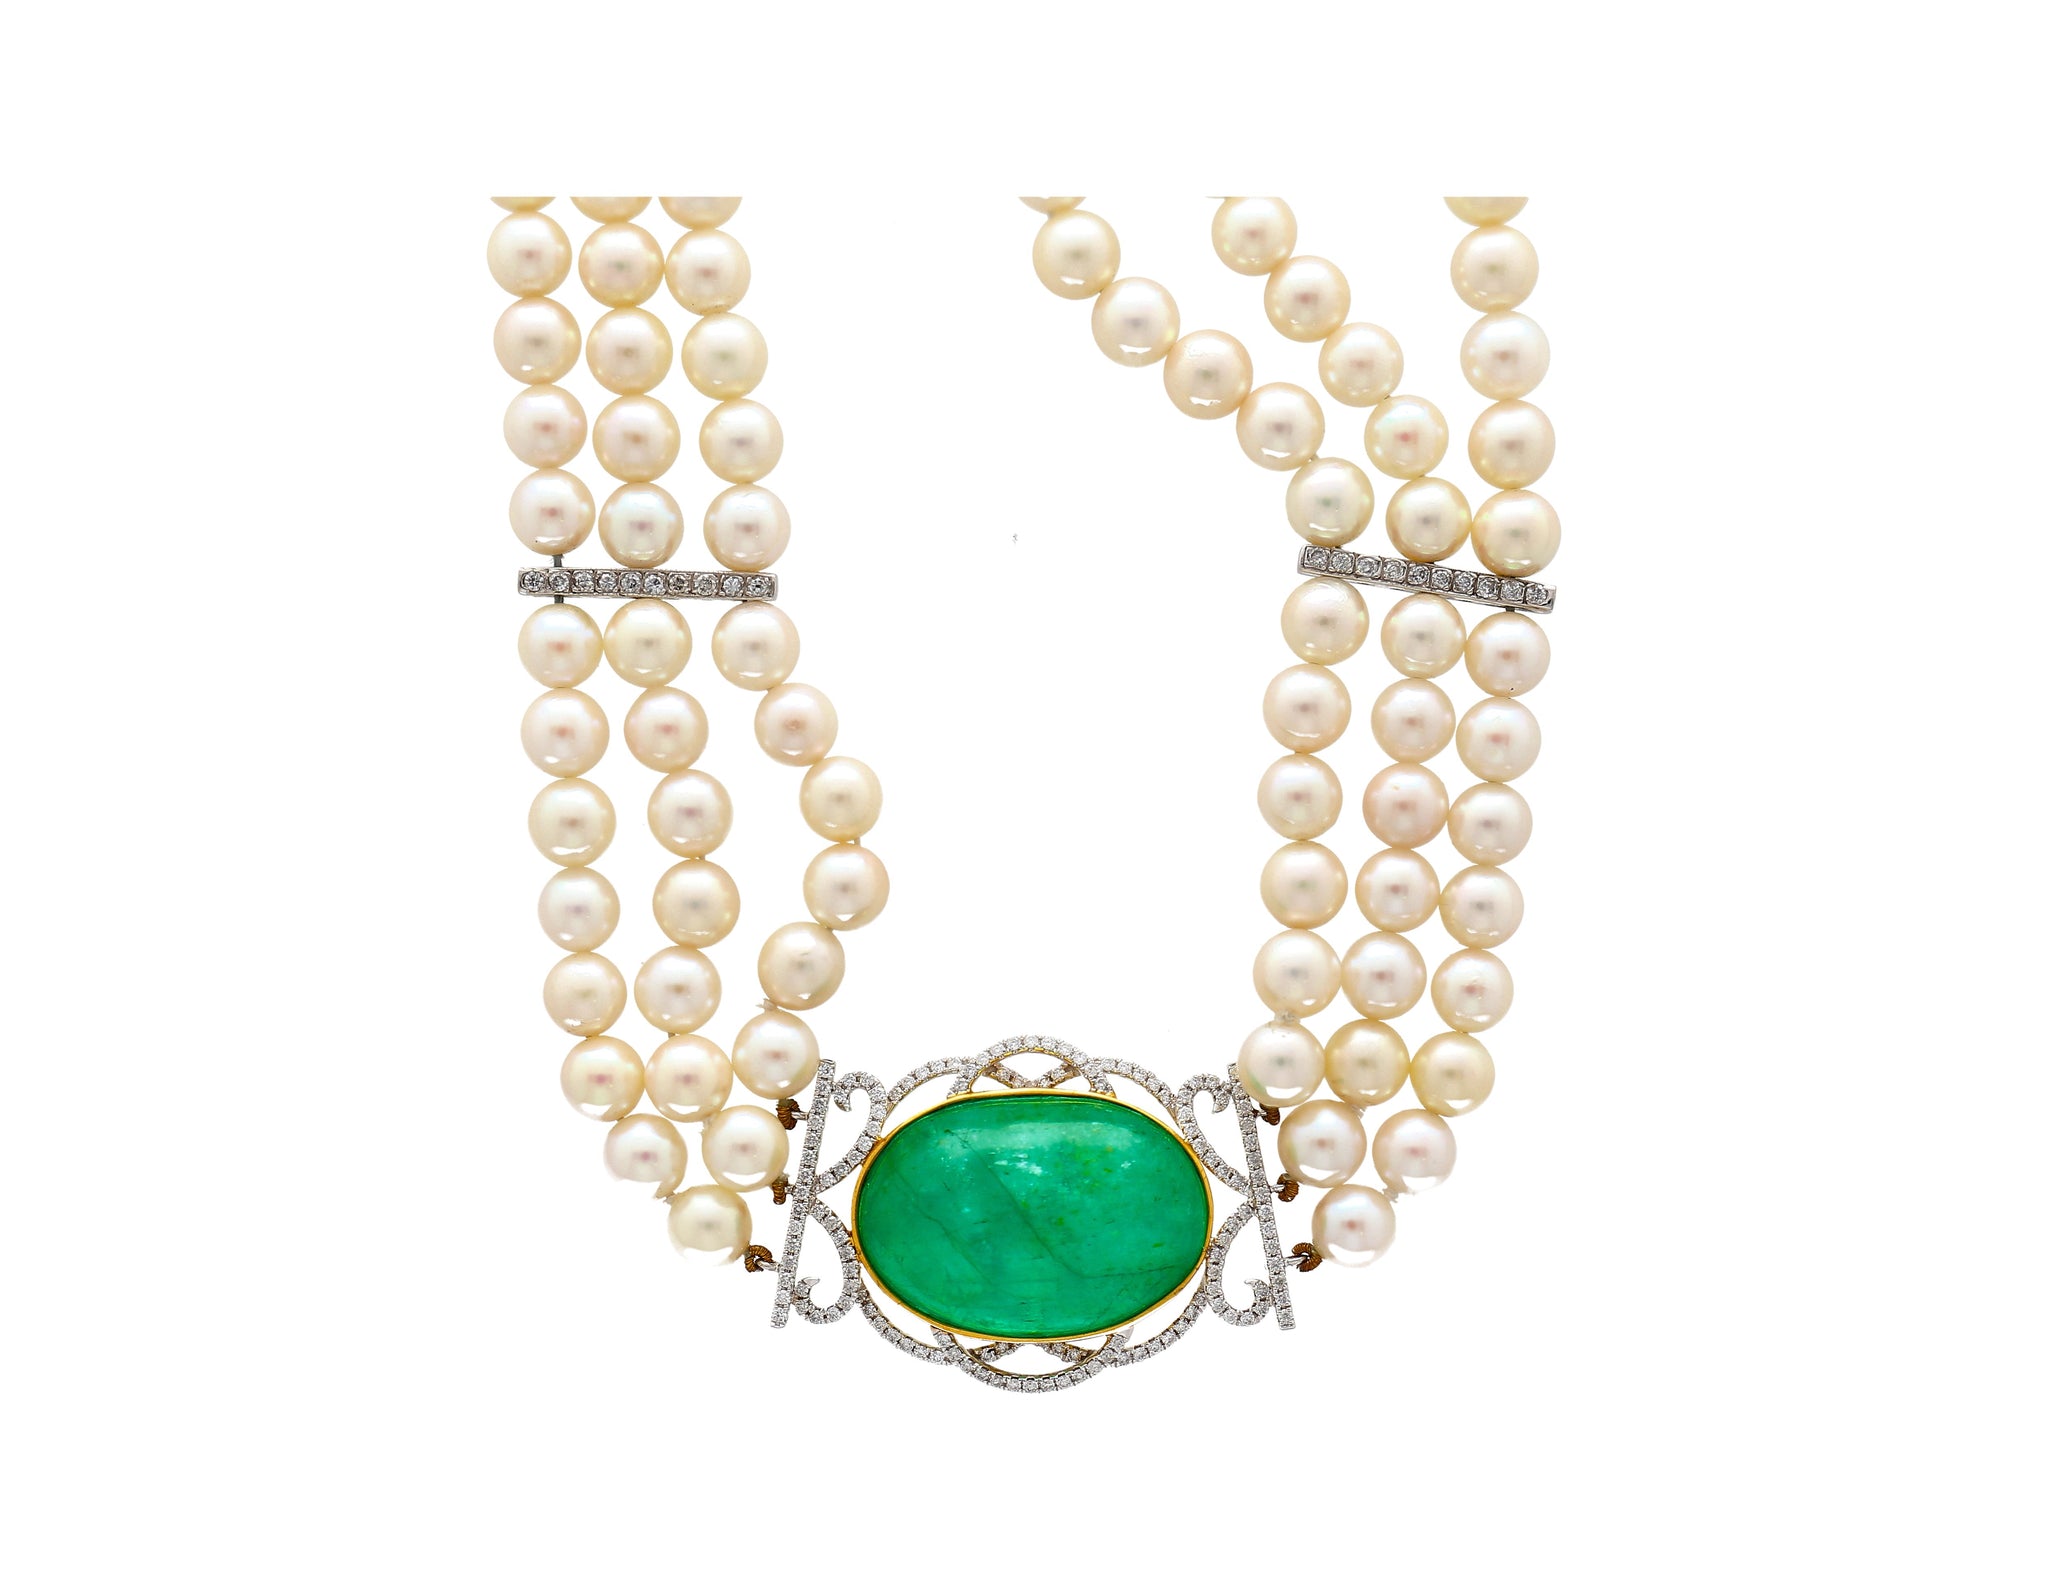 Vintage Victorian Style Cabochon Emerald And 3-Strand Pearl Choker Necklace